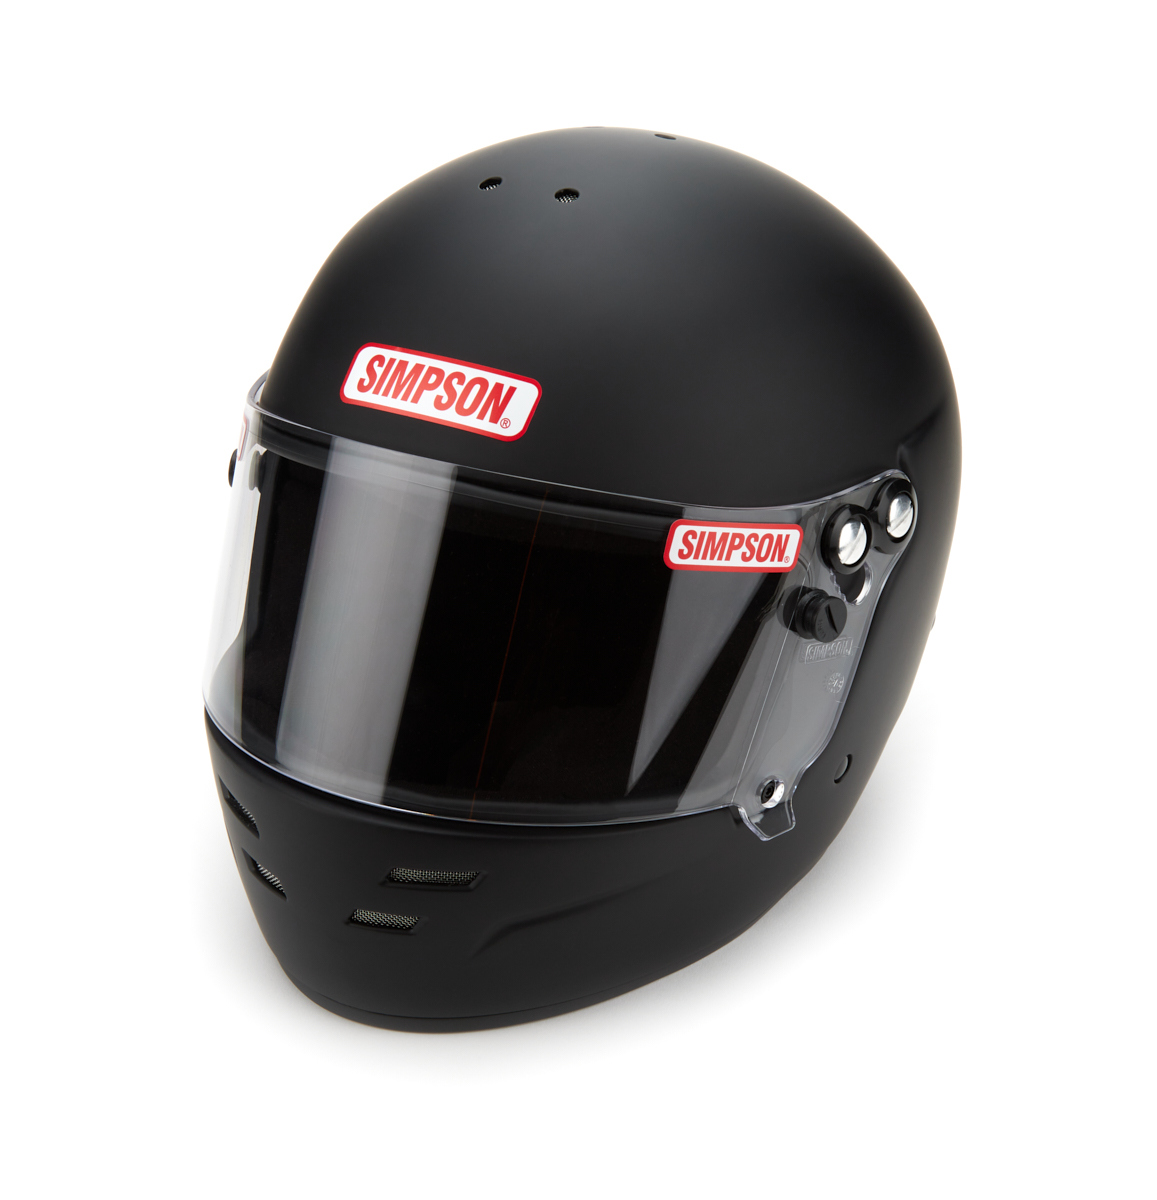 Helmet - Viper - Full Face - Snell SA2020 - Head and Neck Support Ready - Flat Black - Small - Each